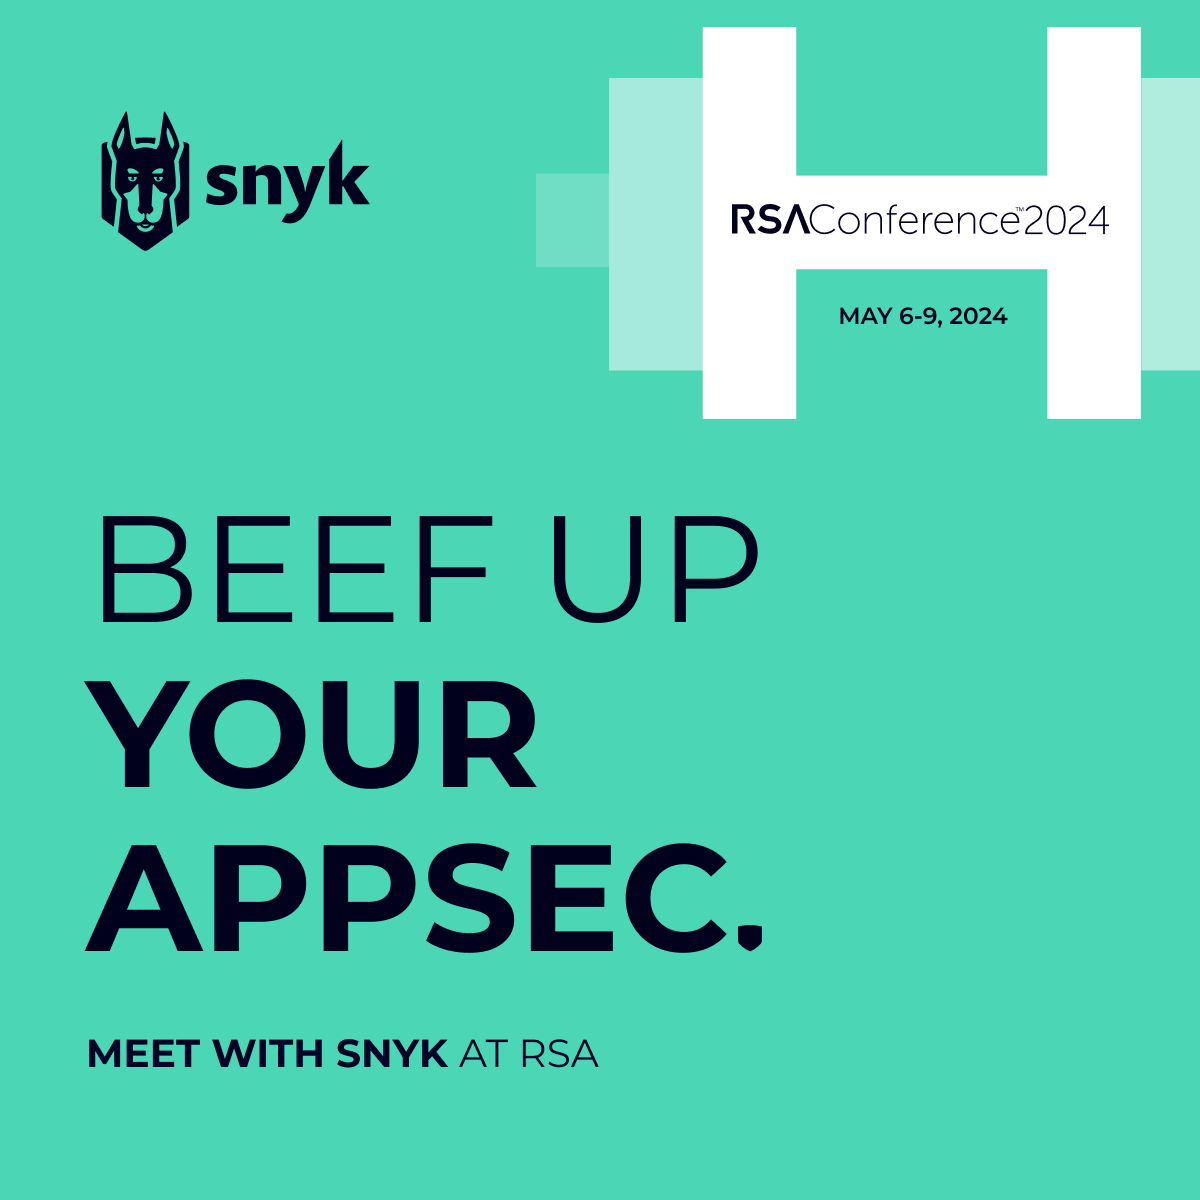 Just like hitting a new PR in the gym, building secure apps takes work — thankfully, Snyk can help you achieve #AppSec health. Meet with us at #RSAC booth #748 to learn more! snyk.co/ugO7g